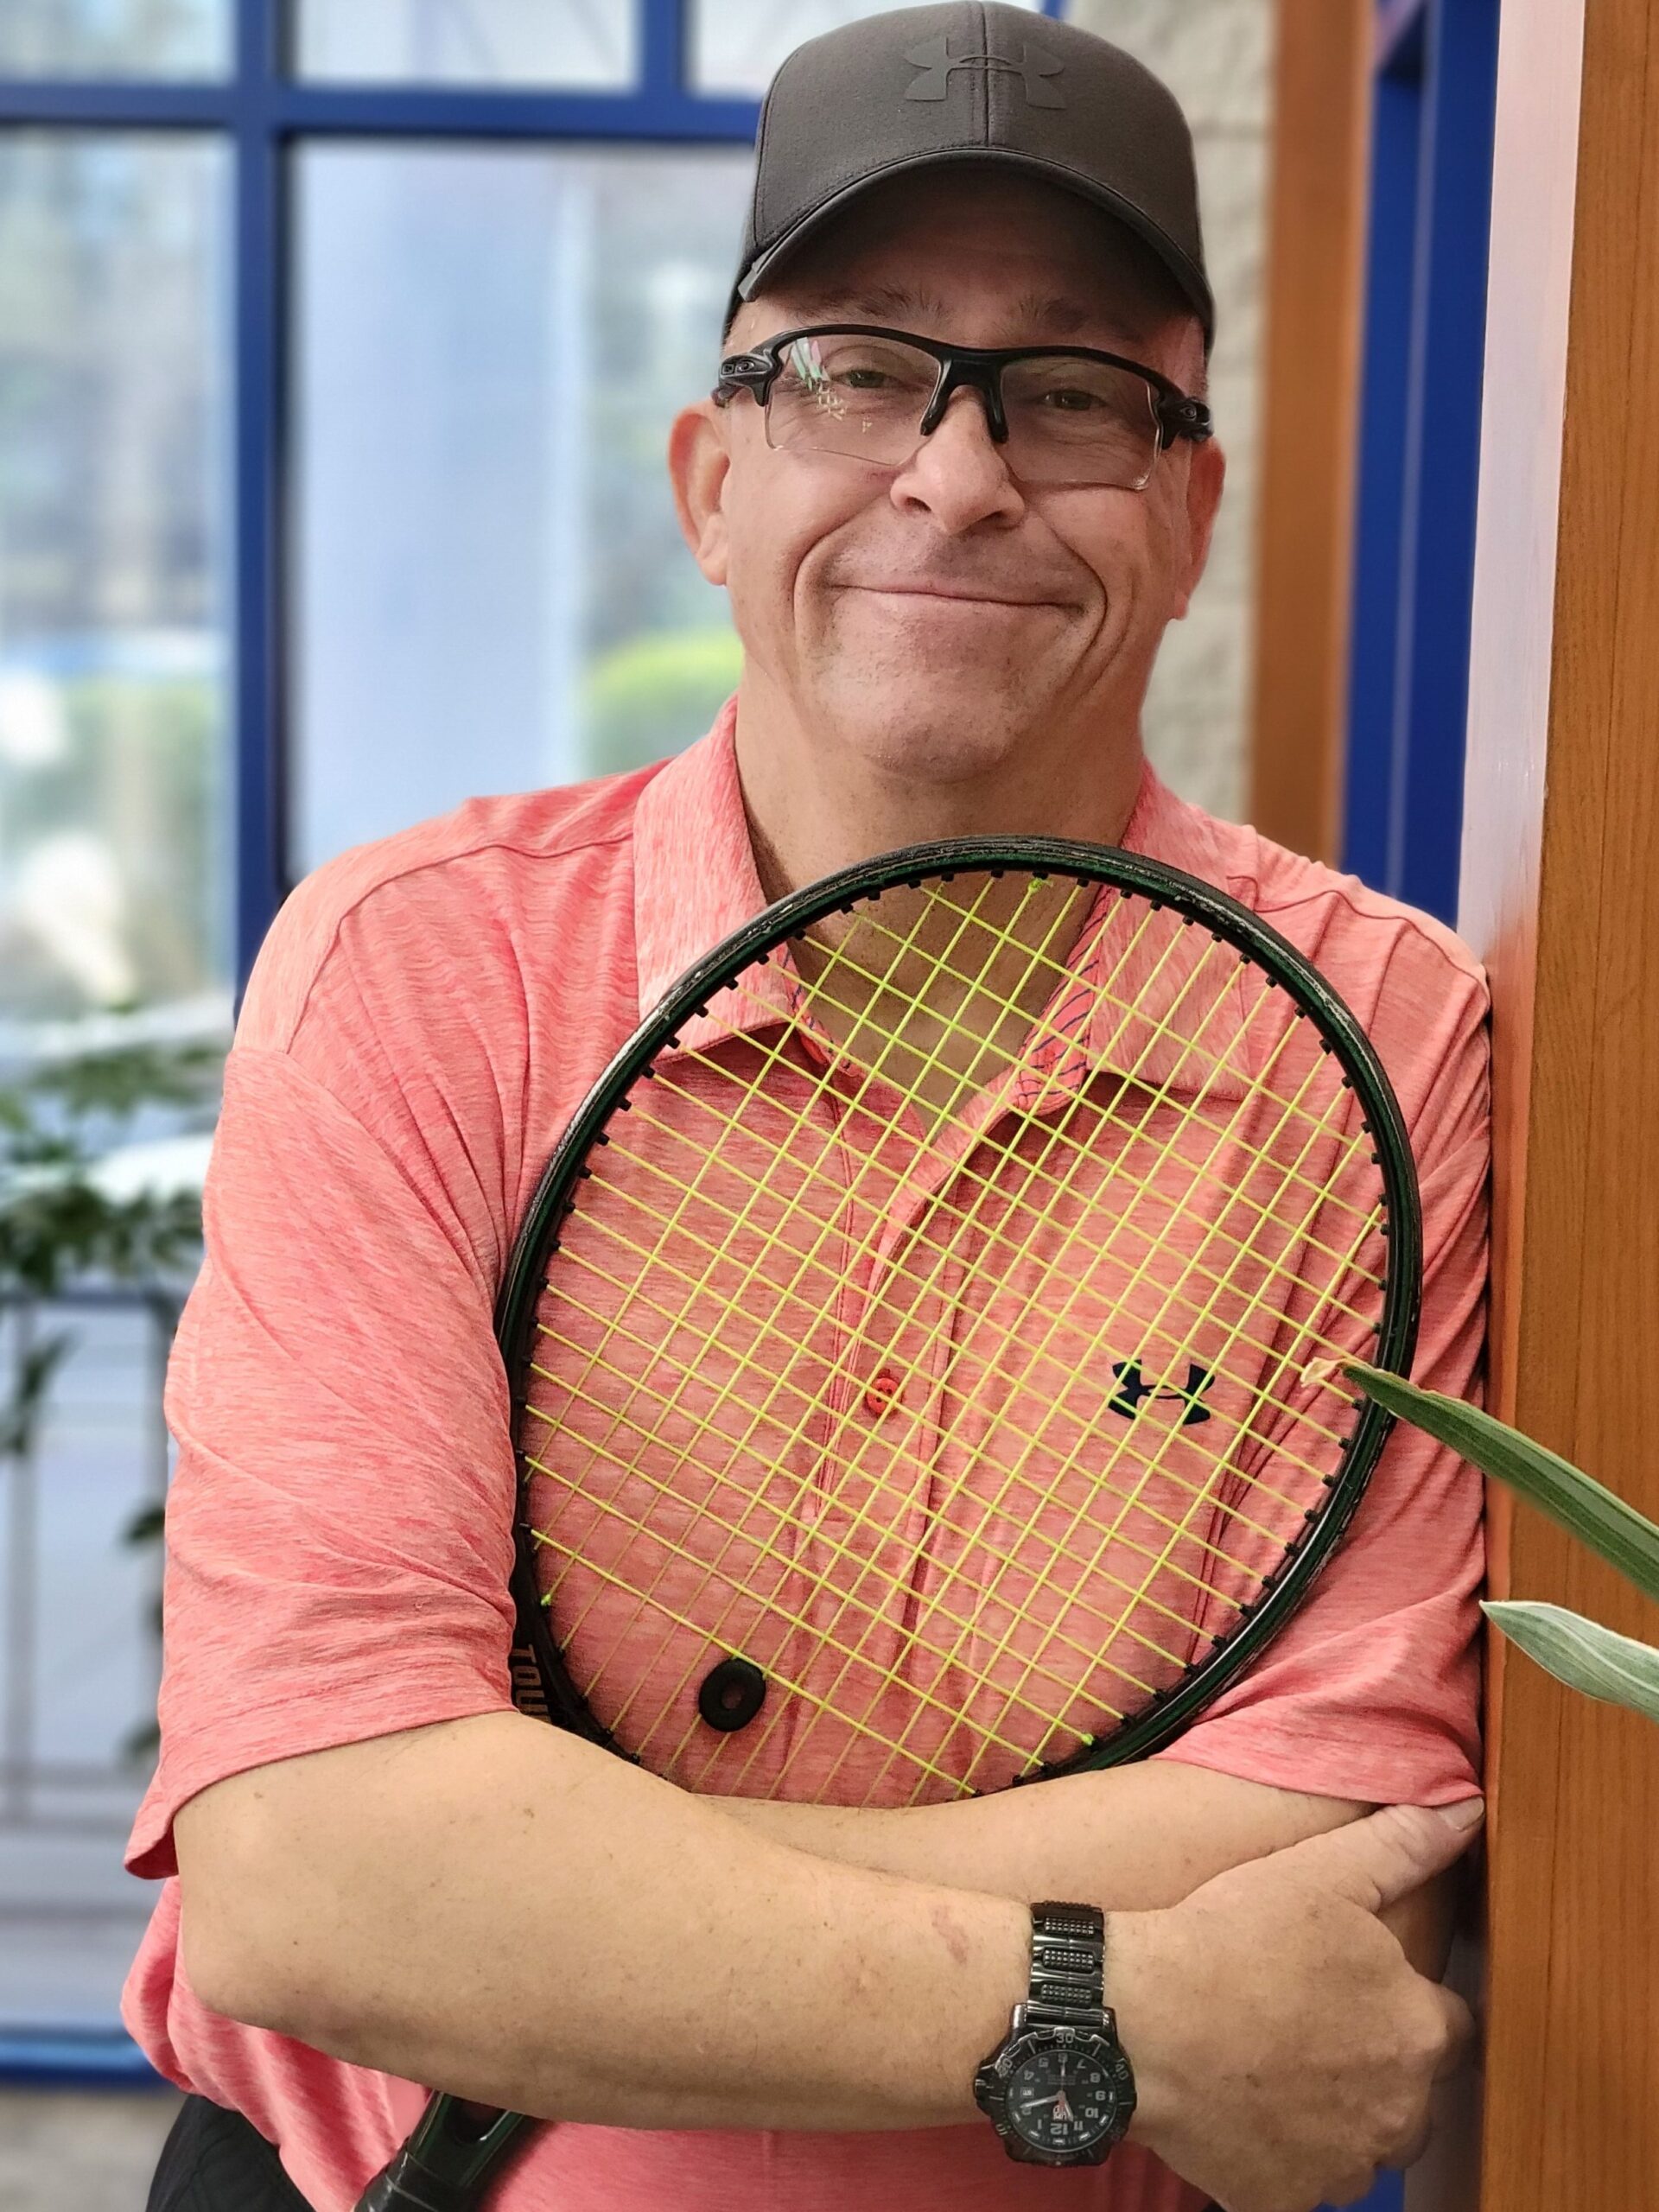 A man holding a tennis racket to his chest and wearing a cap leans against a wood-trimmed wall in a well-lit lobby